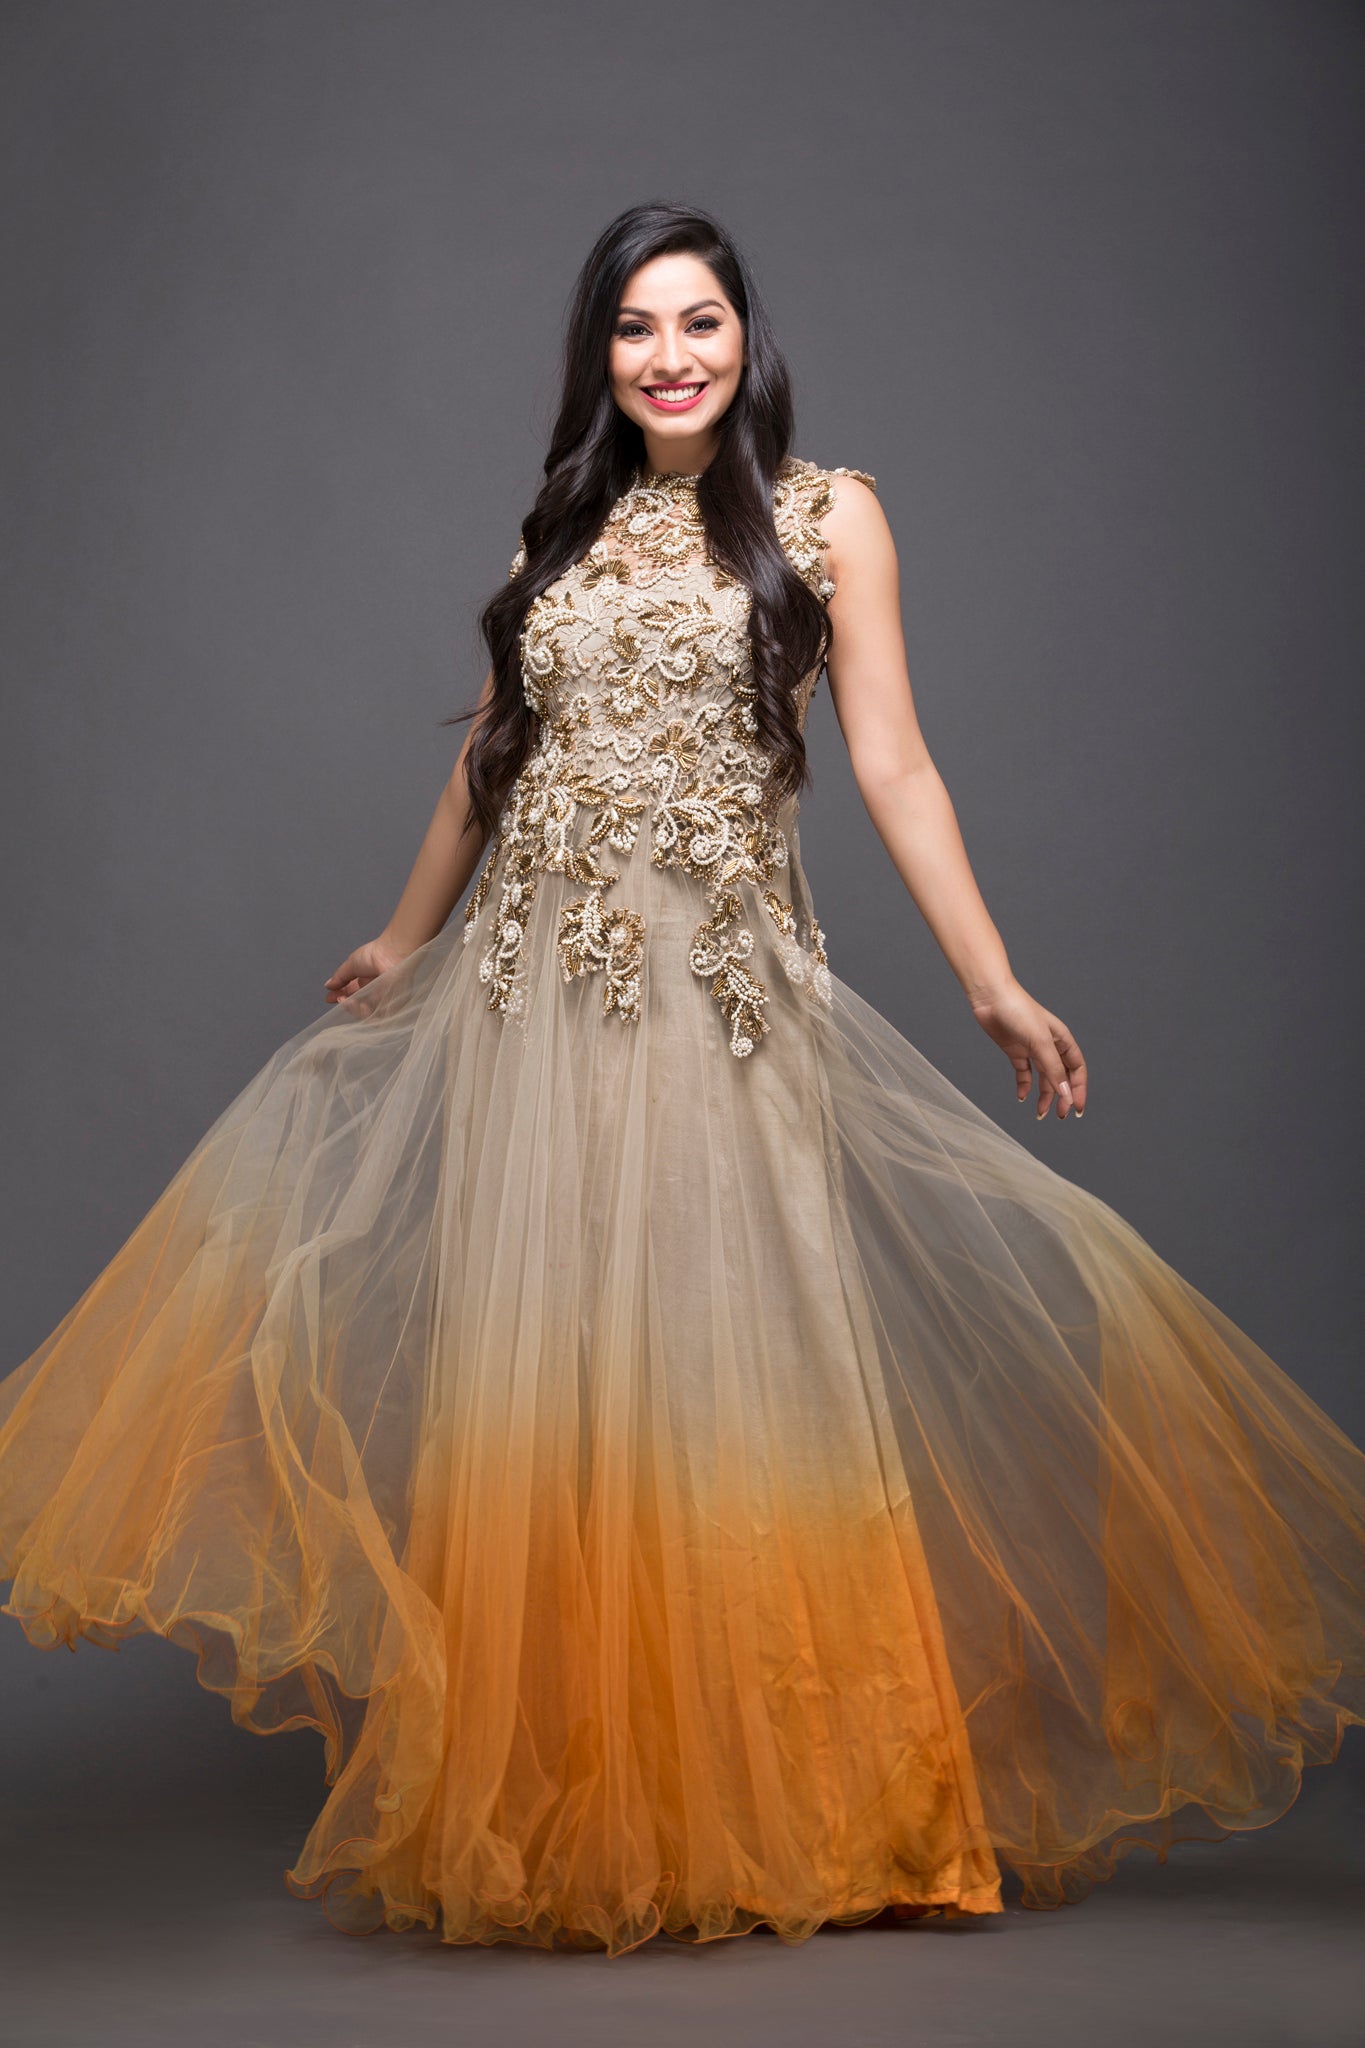 Confessions of a Seamstress: My NEW Belle Gold Gown Design